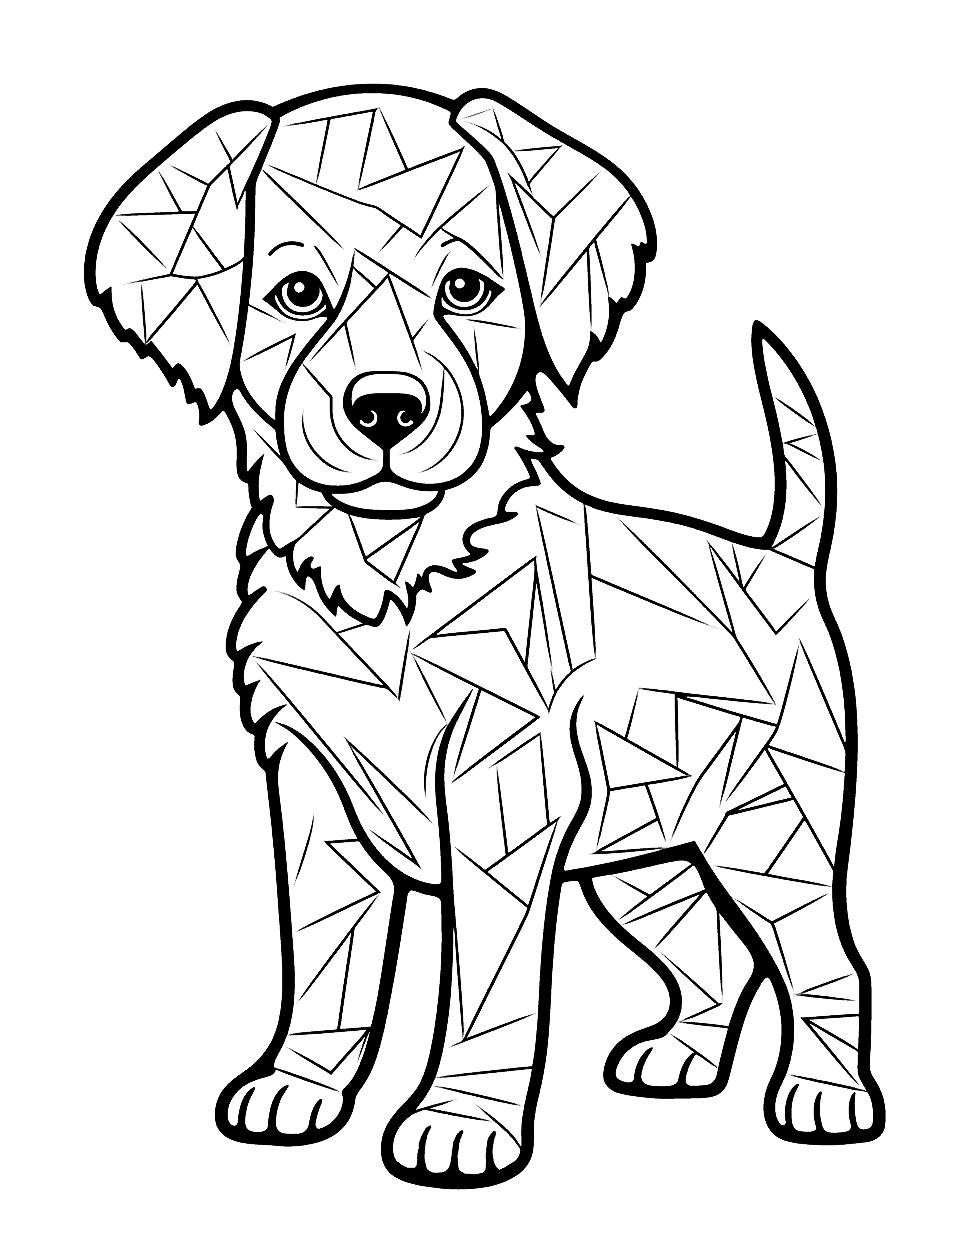 Colorful Art Abstract Golden Retriever Puppy Coloring Page - An abstract version of a Golden Retriever puppy made with various geometric shapes.